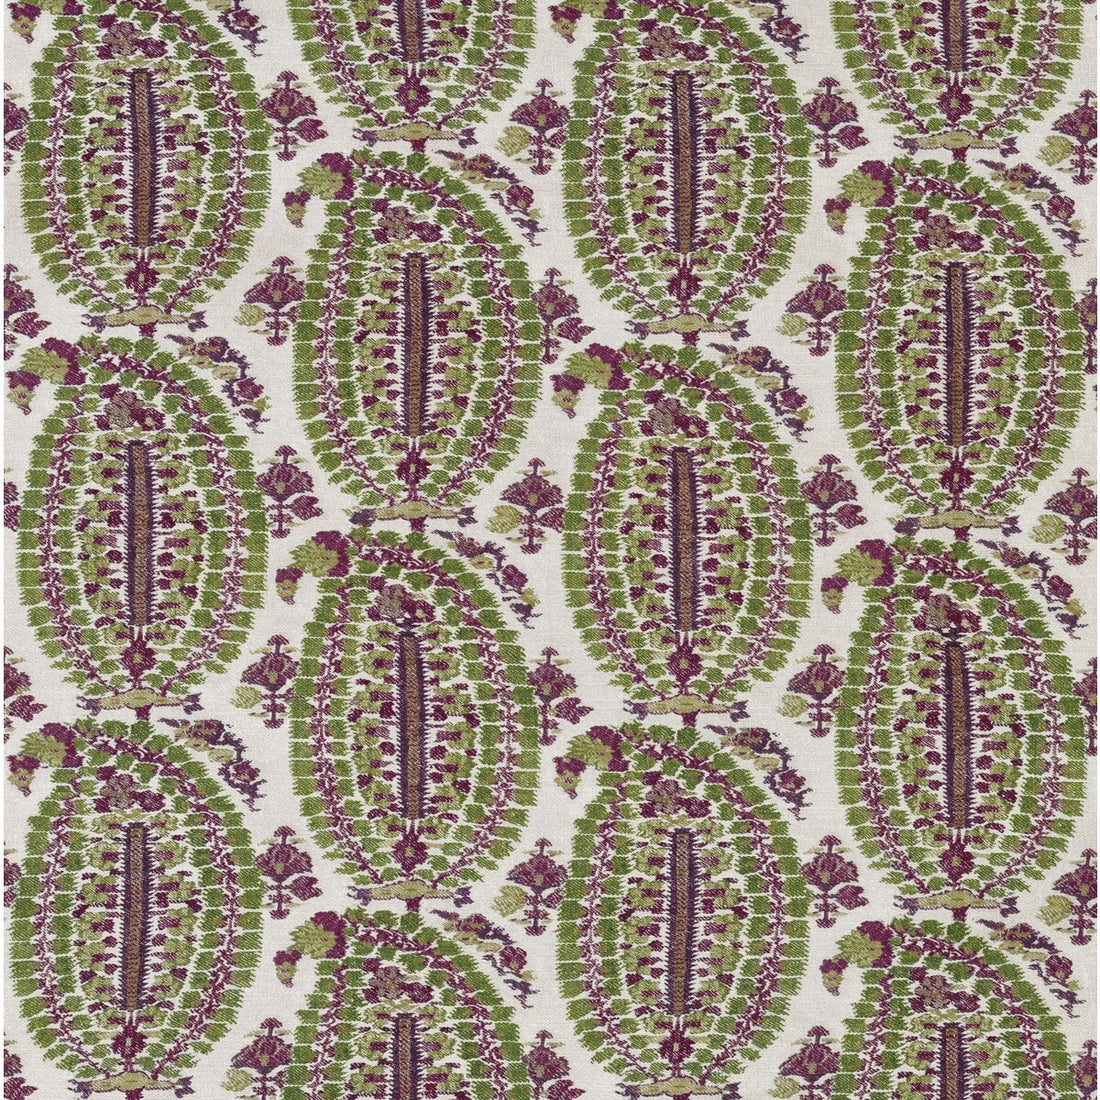 Anoushka fabric in plum/green color - pattern BFC-3660.103.0 - by Lee Jofa in the Blithfield collection